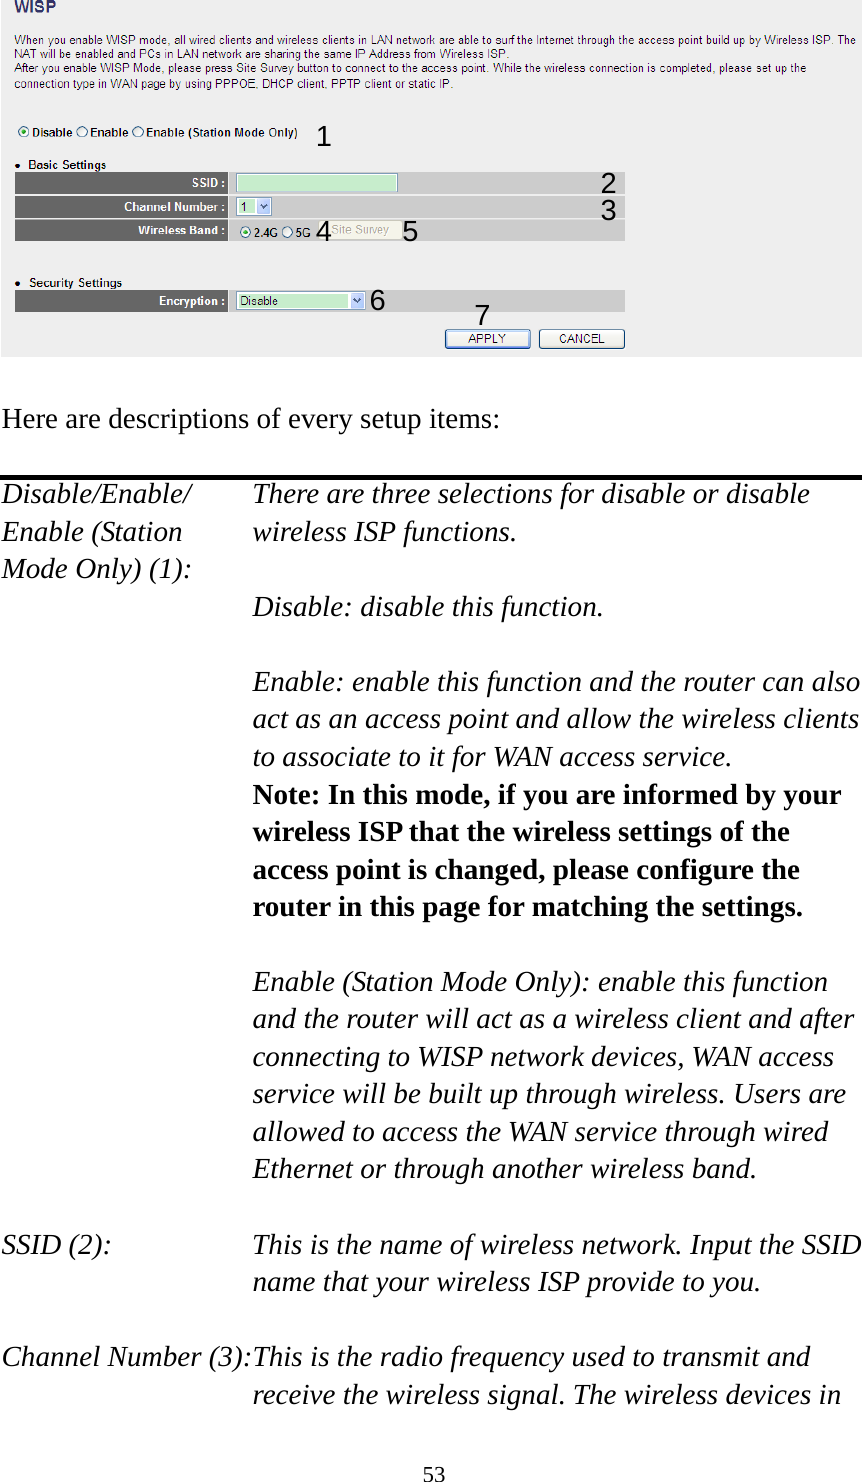 53   Here are descriptions of every setup items:  Disable/Enable/    There are three selections for disable or disable   Enable (Station  wireless ISP functions. Mode Only) (1):   Disable: disable this function.  Enable: enable this function and the router can also act as an access point and allow the wireless clients to associate to it for WAN access service. Note: In this mode, if you are informed by your wireless ISP that the wireless settings of the access point is changed, please configure the router in this page for matching the settings.  Enable (Station Mode Only): enable this function and the router will act as a wireless client and after connecting to WISP network devices, WAN access service will be built up through wireless. Users are allowed to access the WAN service through wired Ethernet or through another wireless band.  SSID (2):    This is the name of wireless network. Input the SSID name that your wireless ISP provide to you.  Channel Number (3):This is the radio frequency used to transmit and receive the wireless signal. The wireless devices in 1 2345 76